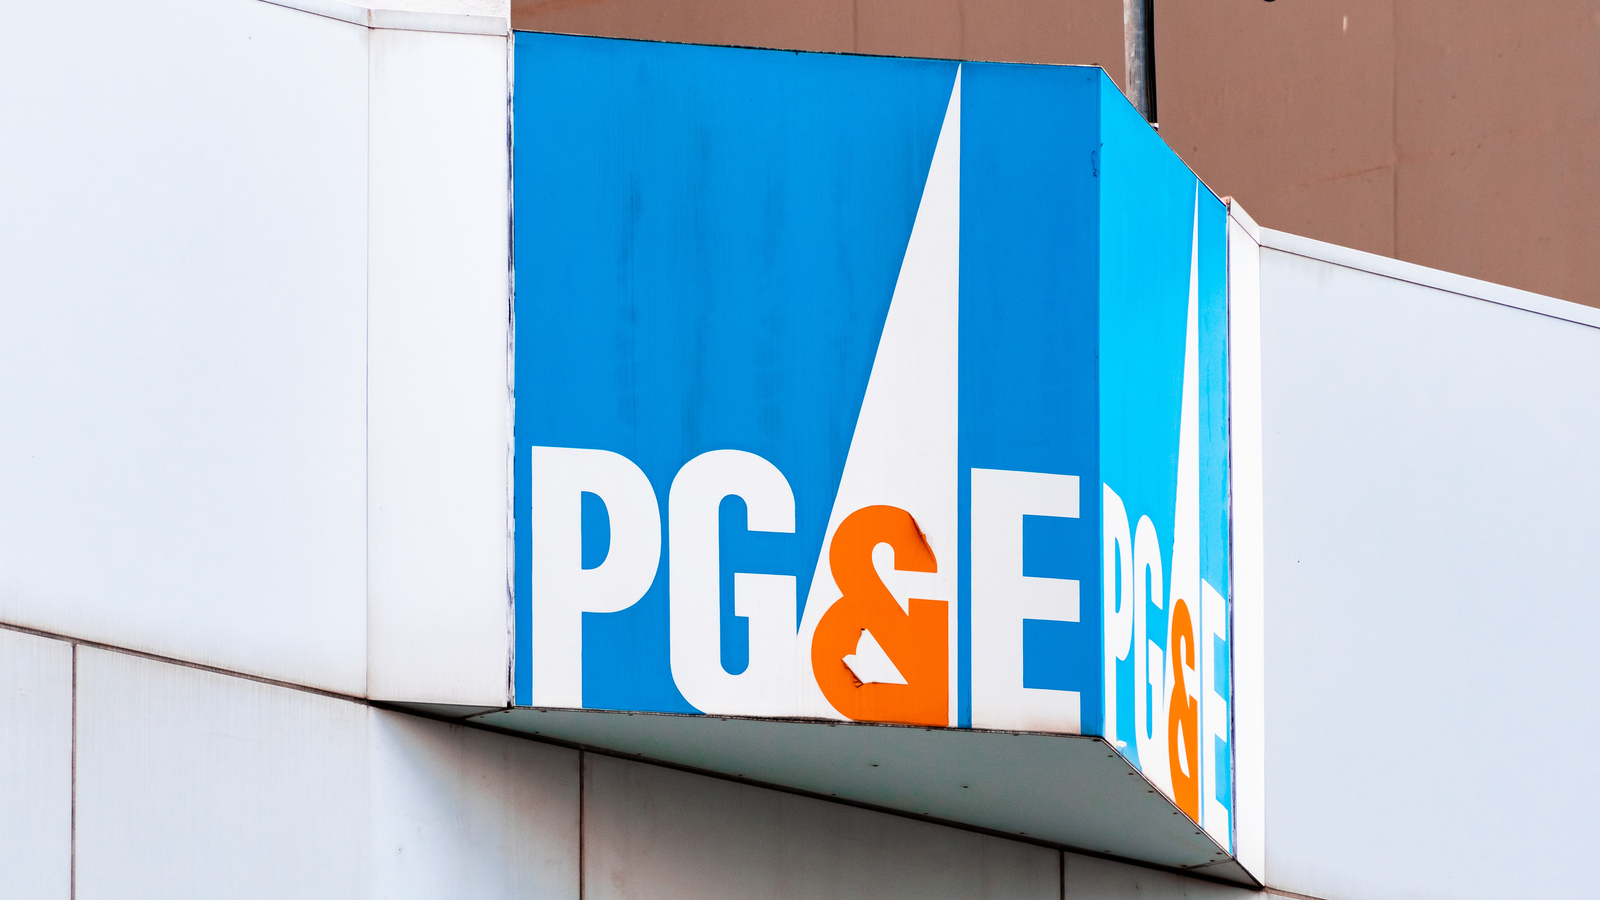 the PG&E logo on the front of a building PCG stock